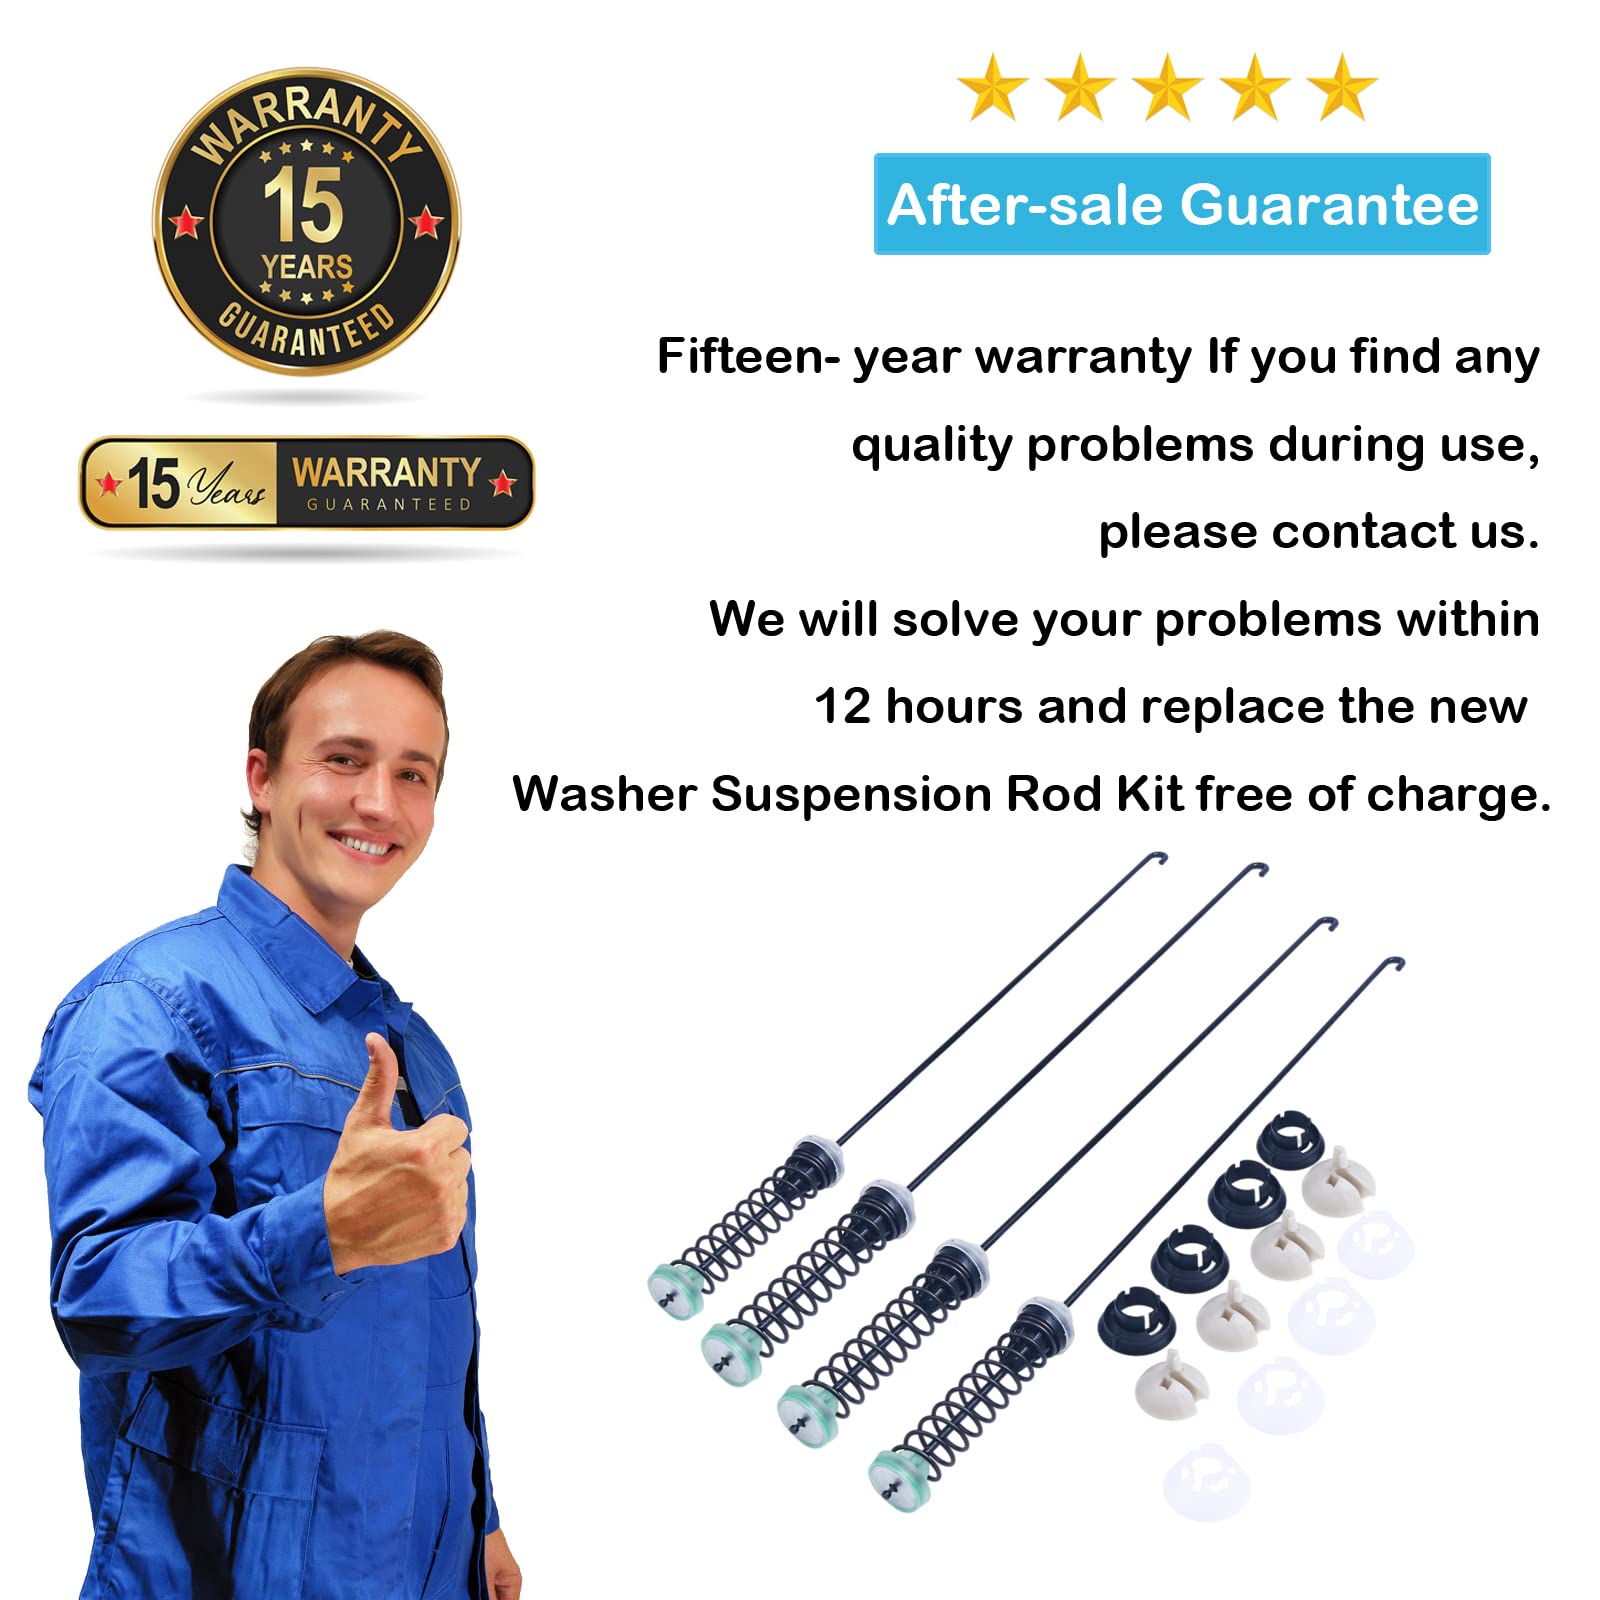 W11130362 WTW5000DW2 Washer Suspension Rod Kit replacement part,Washer Parts replaces 11022352510, MVWC565FW0, WTW5000DW0, WTW5000DW2 Compatible with Whirlpool Maytag Kenmore Amana Washing Machines